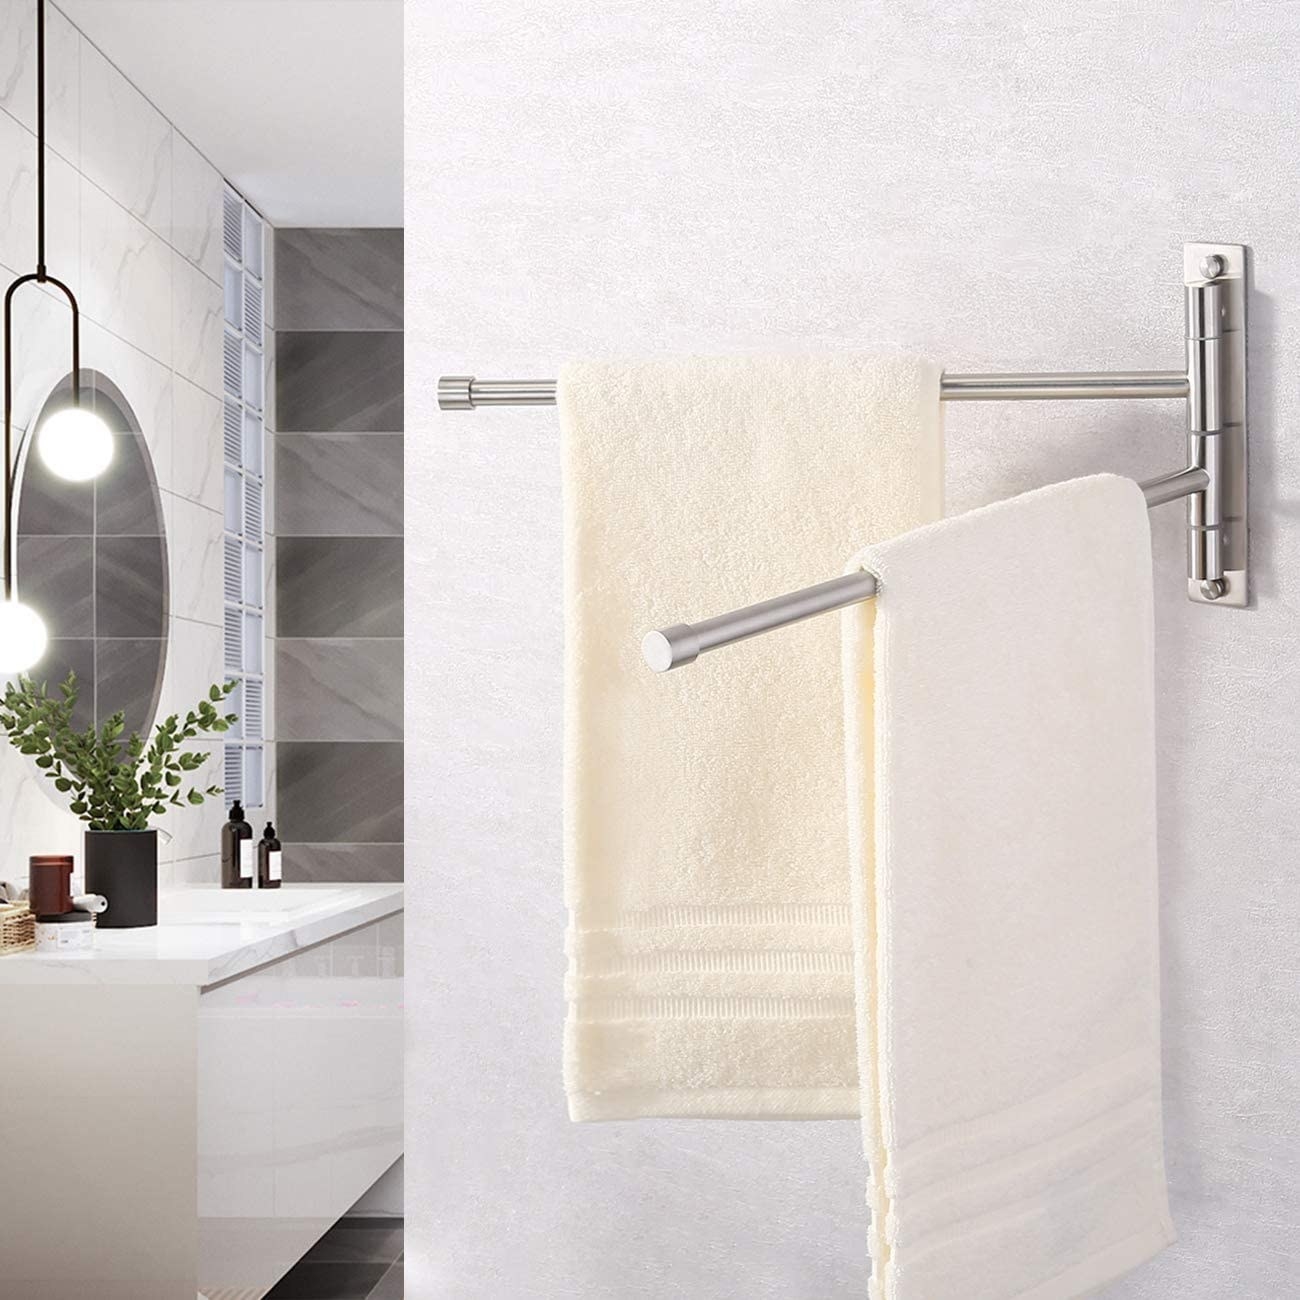 A metal towel rack with two bars that have towels hanging from them